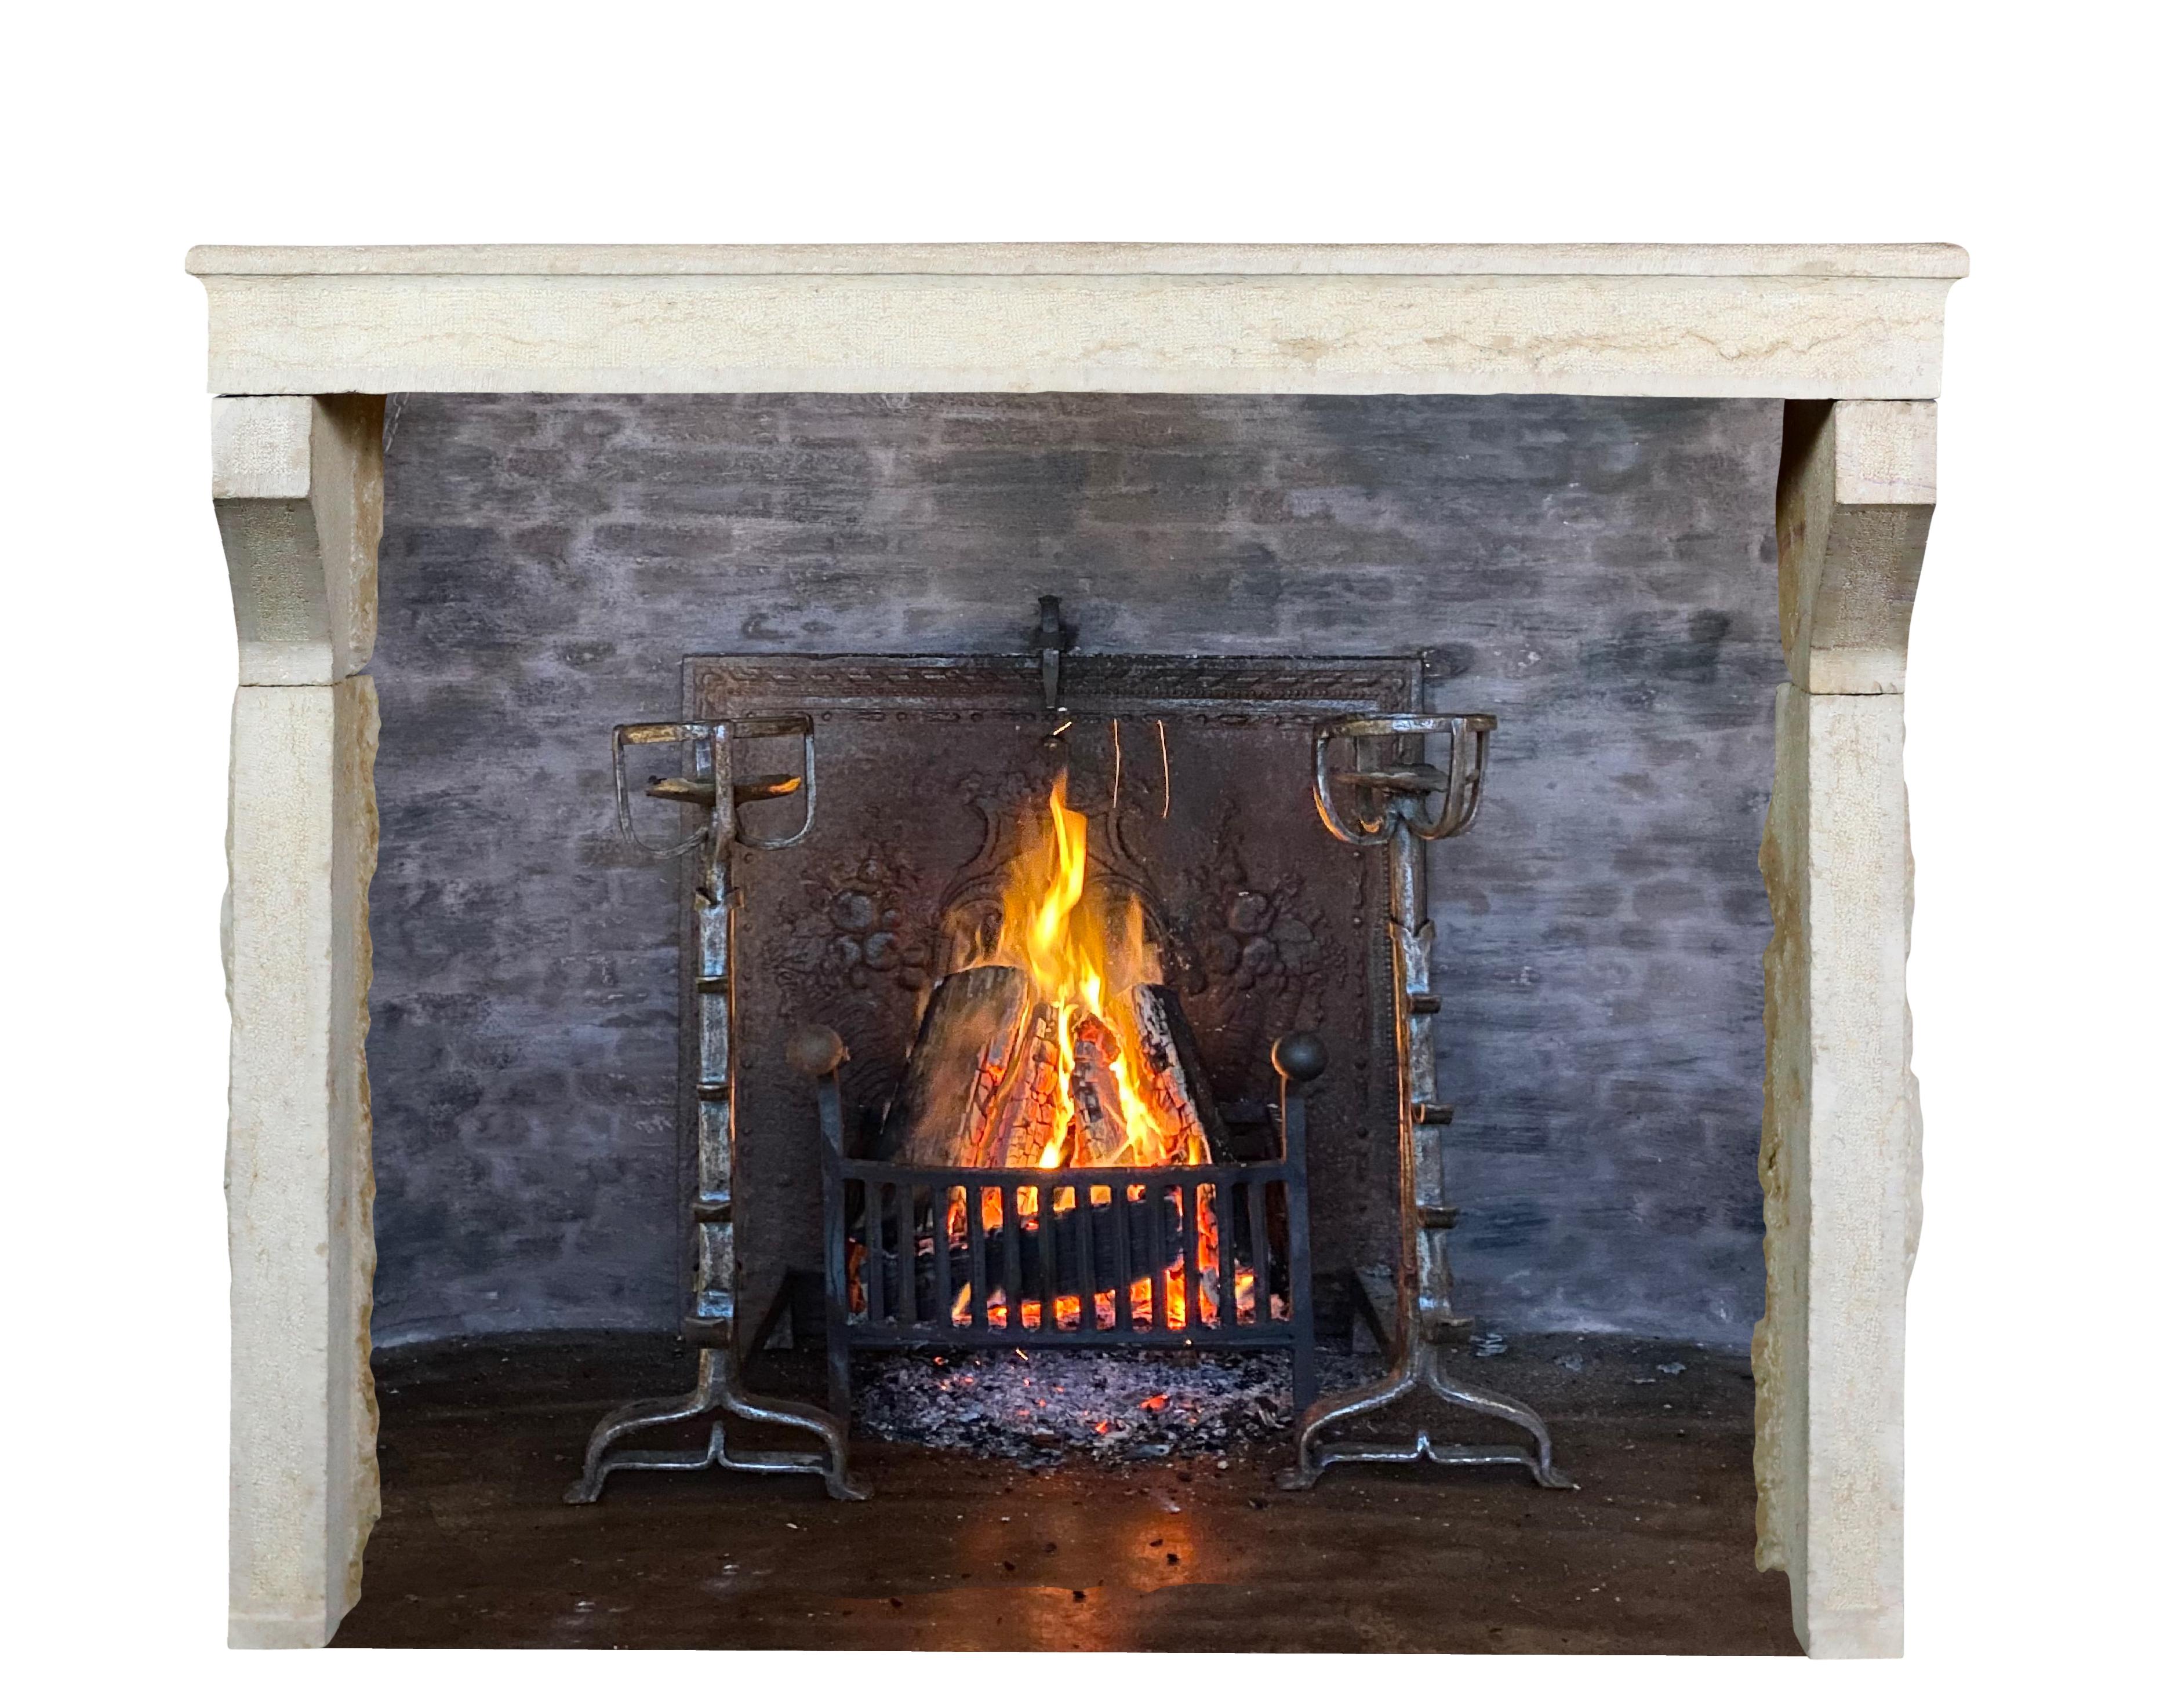 Elegant monochrome beige limestone French farm style fireplace surround in great condition. This European fireplace mantle is simple and has a timeless style for contemporary eclectic interior project. With over 6 Feet wide it has rather unusual